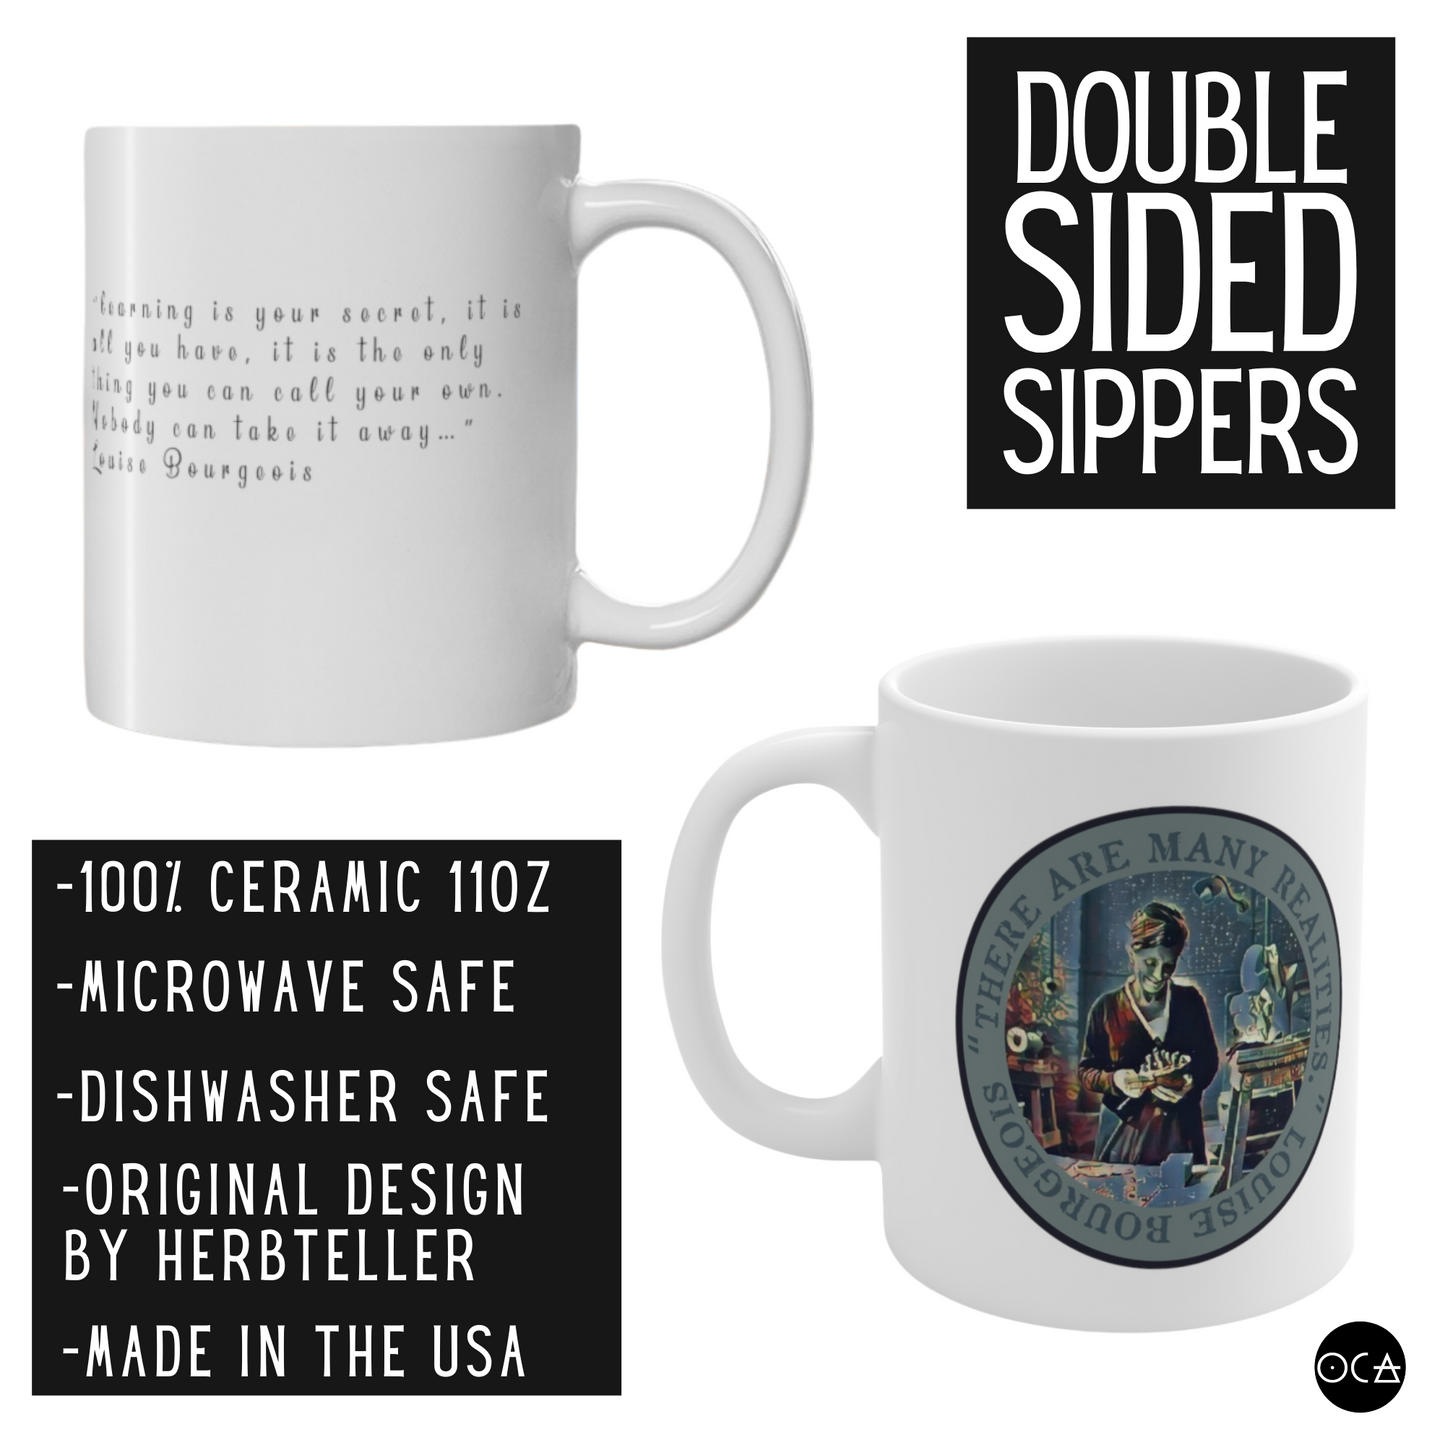 Louise Bourgeois  Doublesided Mug (2 Different Design Options)